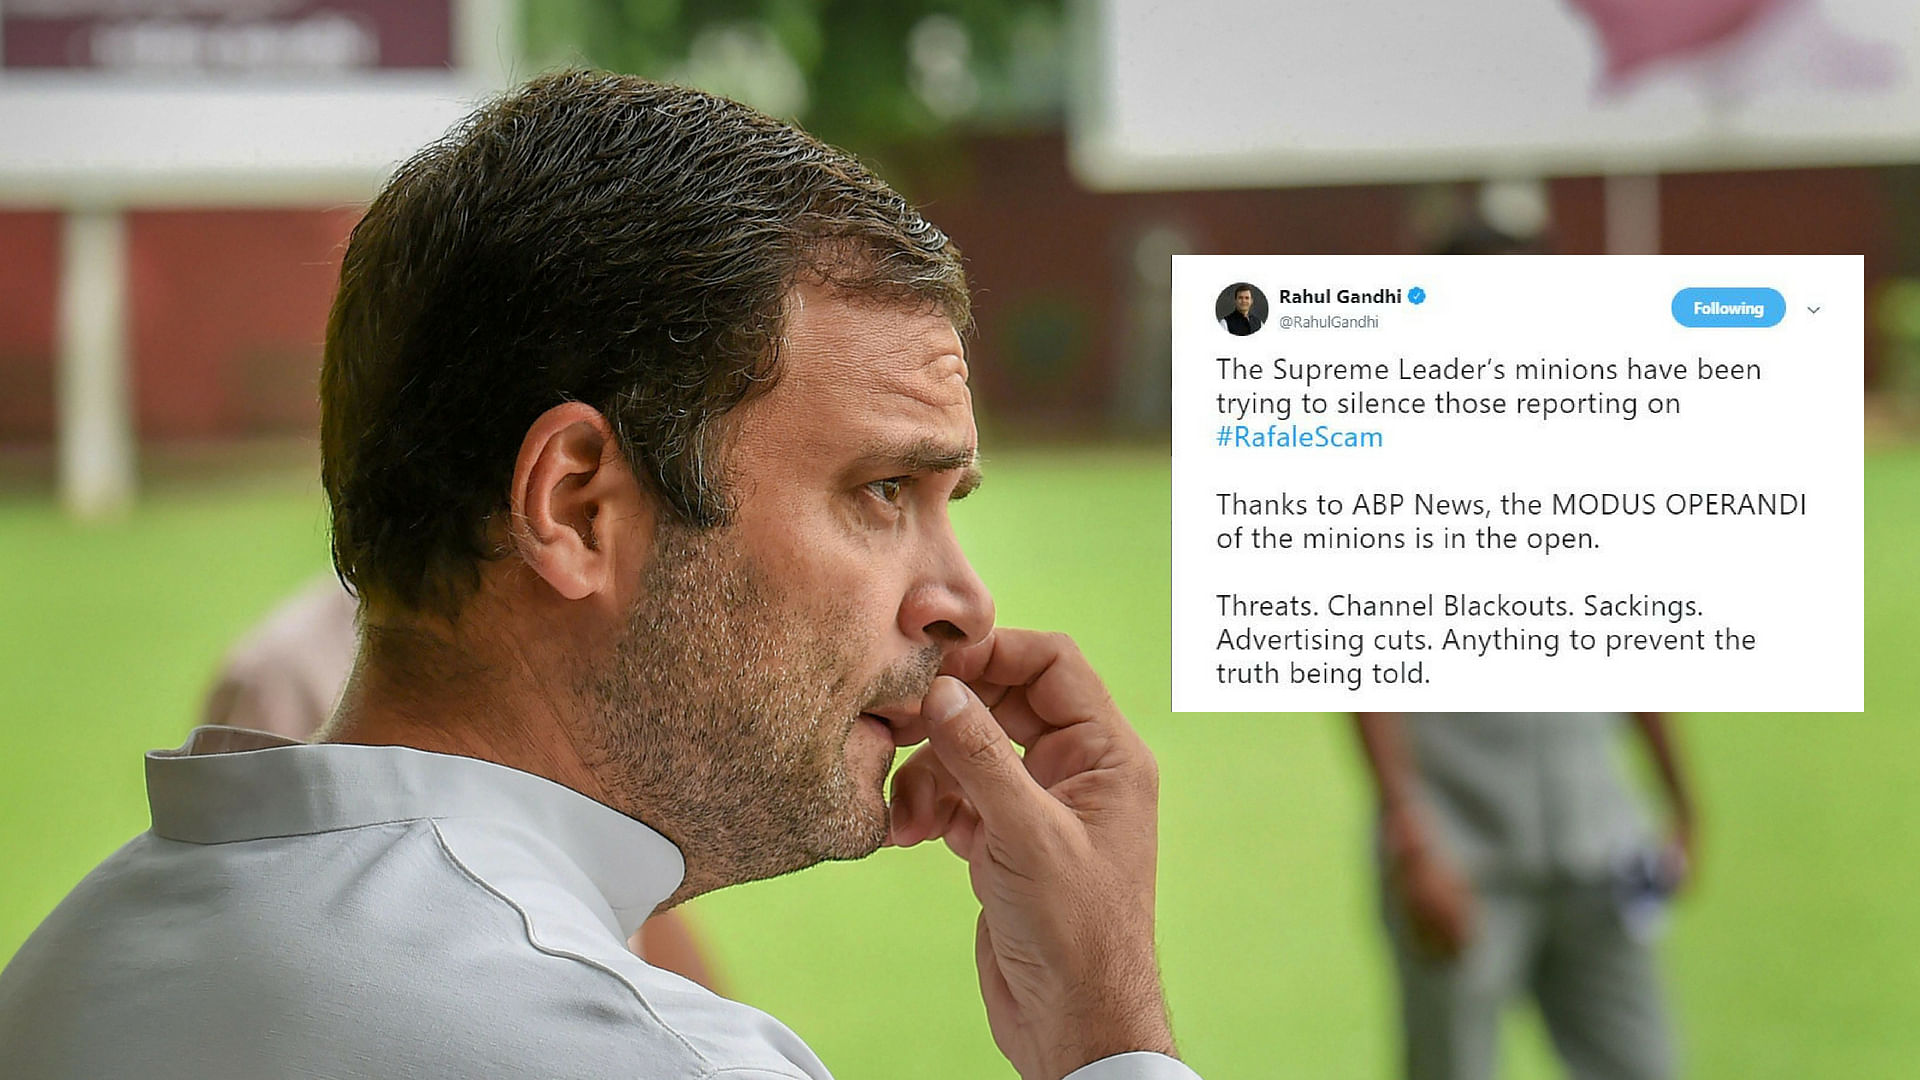 Rahul Gandhi alleges Centre’s attempt to muzzle media on reporting of Rafale aircraft deal.